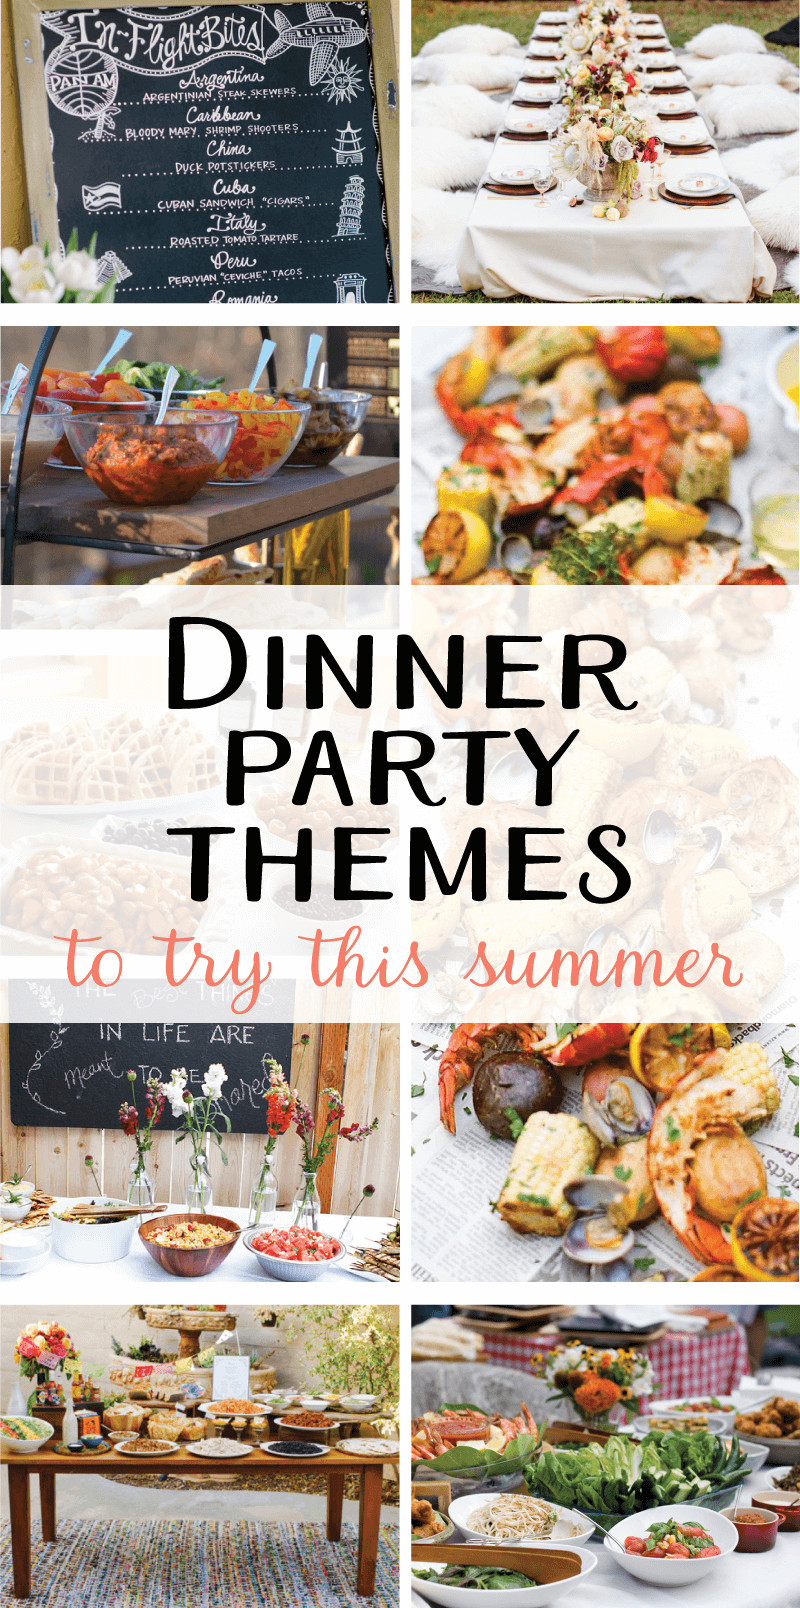 Summer Party Buffet Menu Ideas
 9 Creative Dinner Party Themes to Try this Summer on